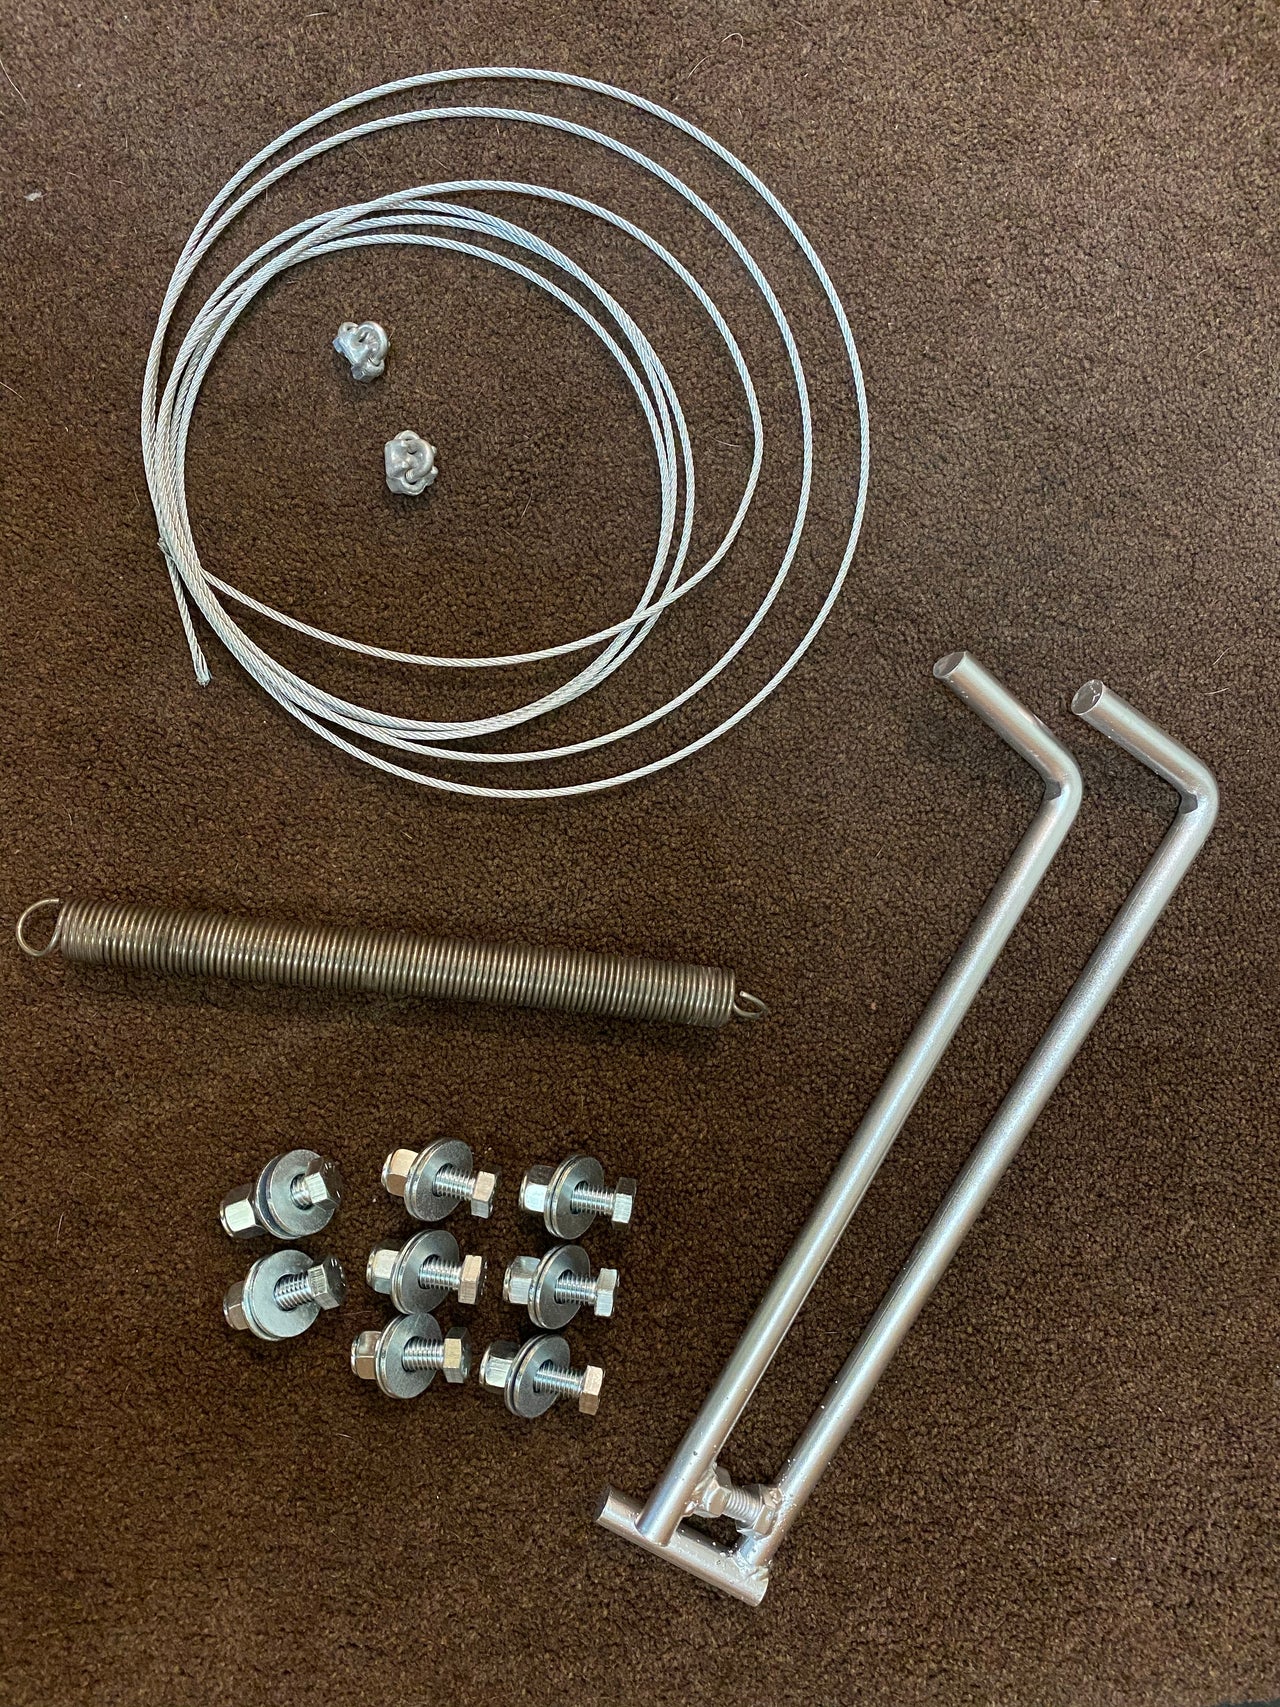 HOG TRAP HARDWARE REPLACEMENT KIT (in case your original gets damaged)